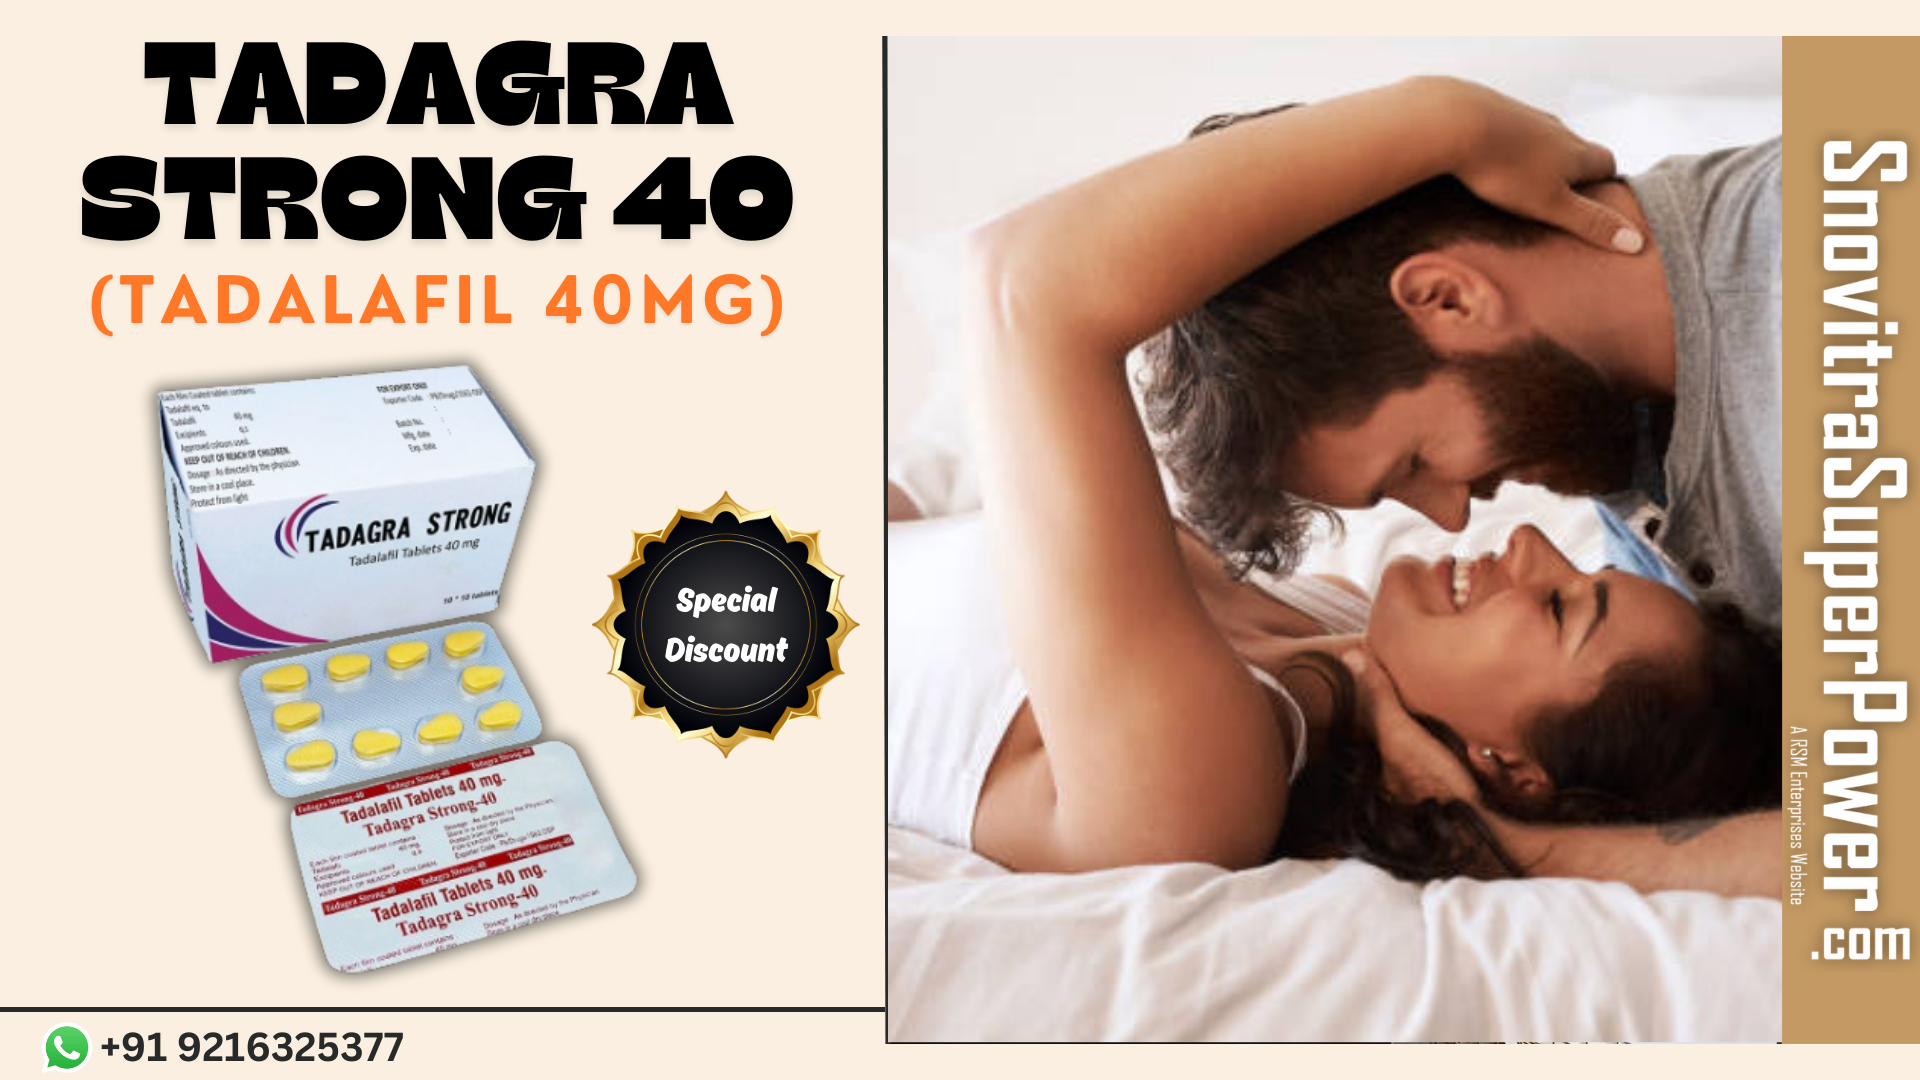 Tadagra Strong 40: An Oral Medication to Manage Erection Failure in Males